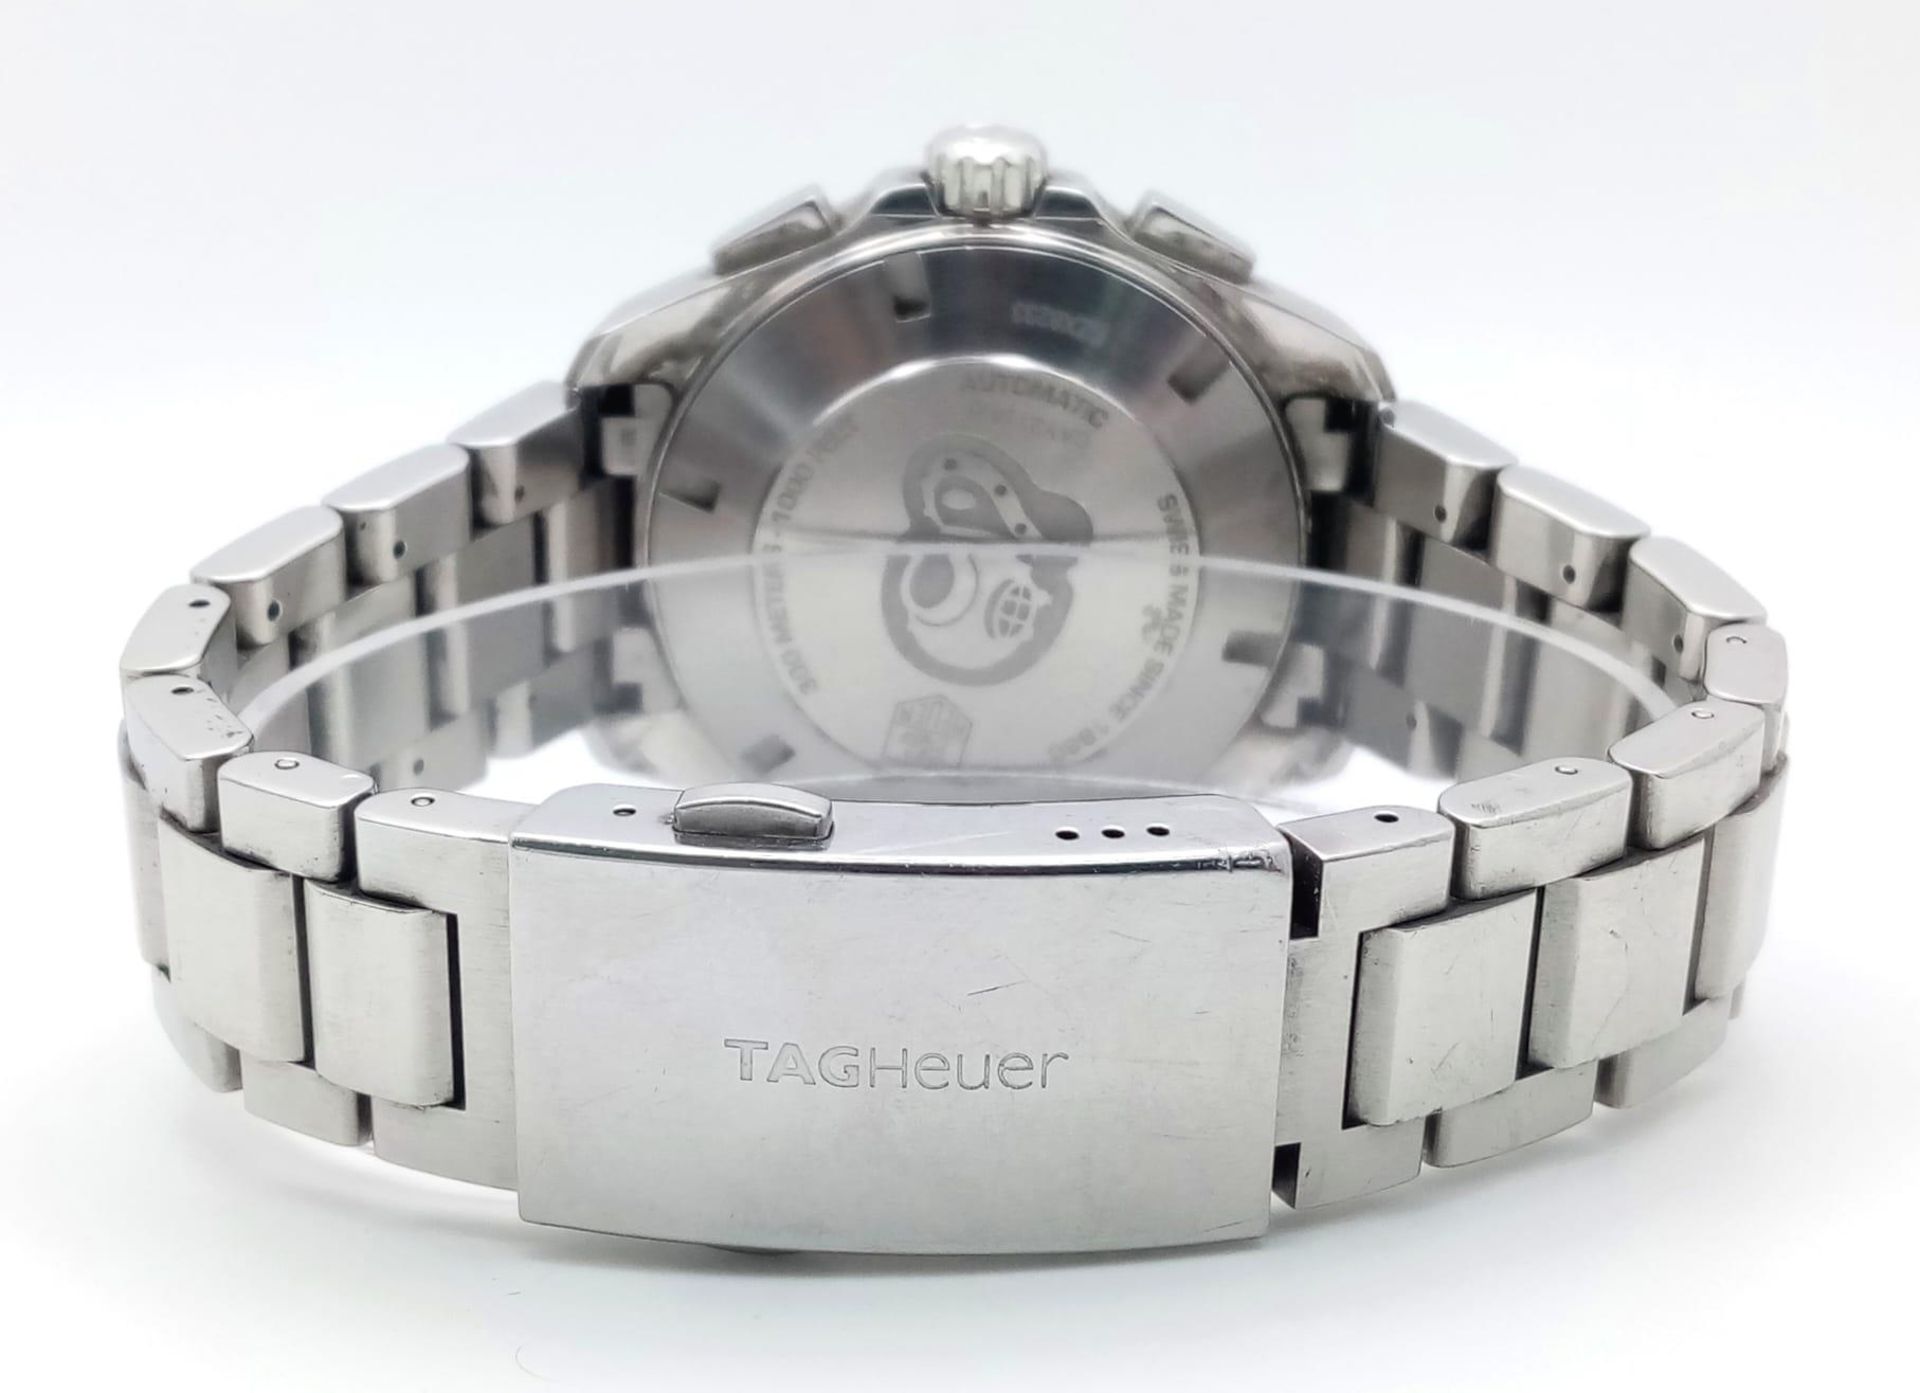 A Tag Heuer Automatic Aquaracer Gents Watch. Stainless steel bracelet and case - 44mm. Black dial - Image 5 of 8